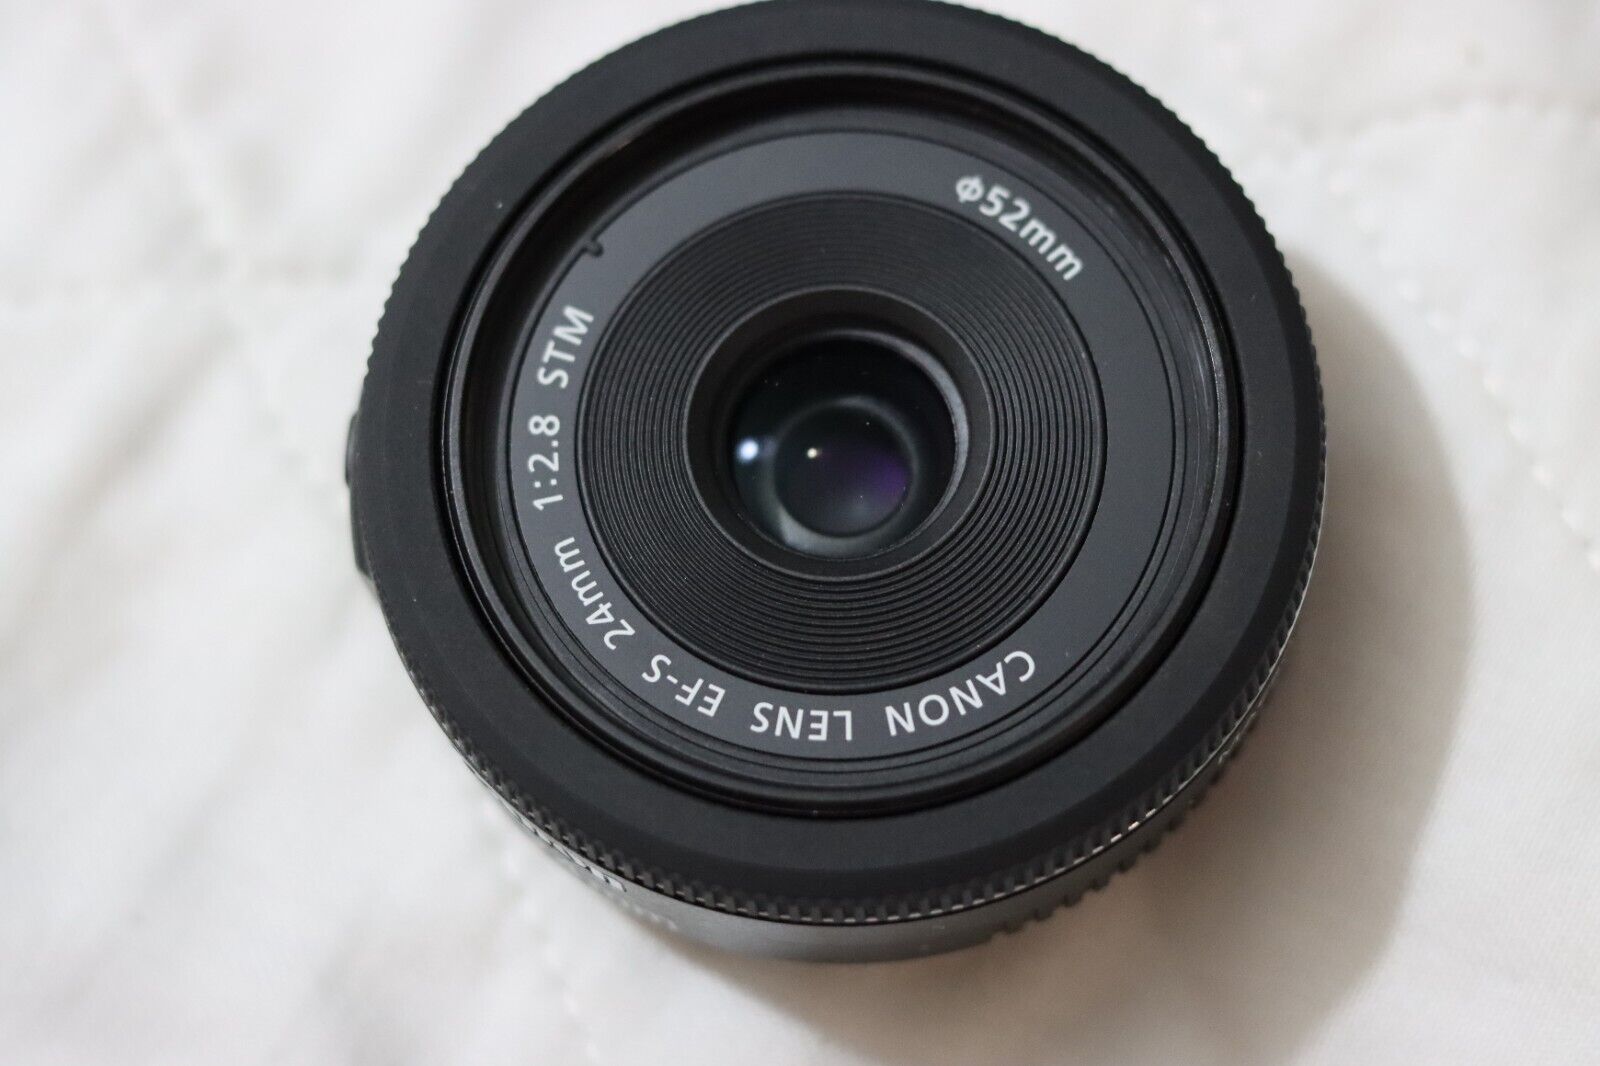 Canon Lens EF-S 24mm 1:2.8 STM 52mm Macro 0.16m/0.52ft Very Light Use Condition Canon EFS 24mm